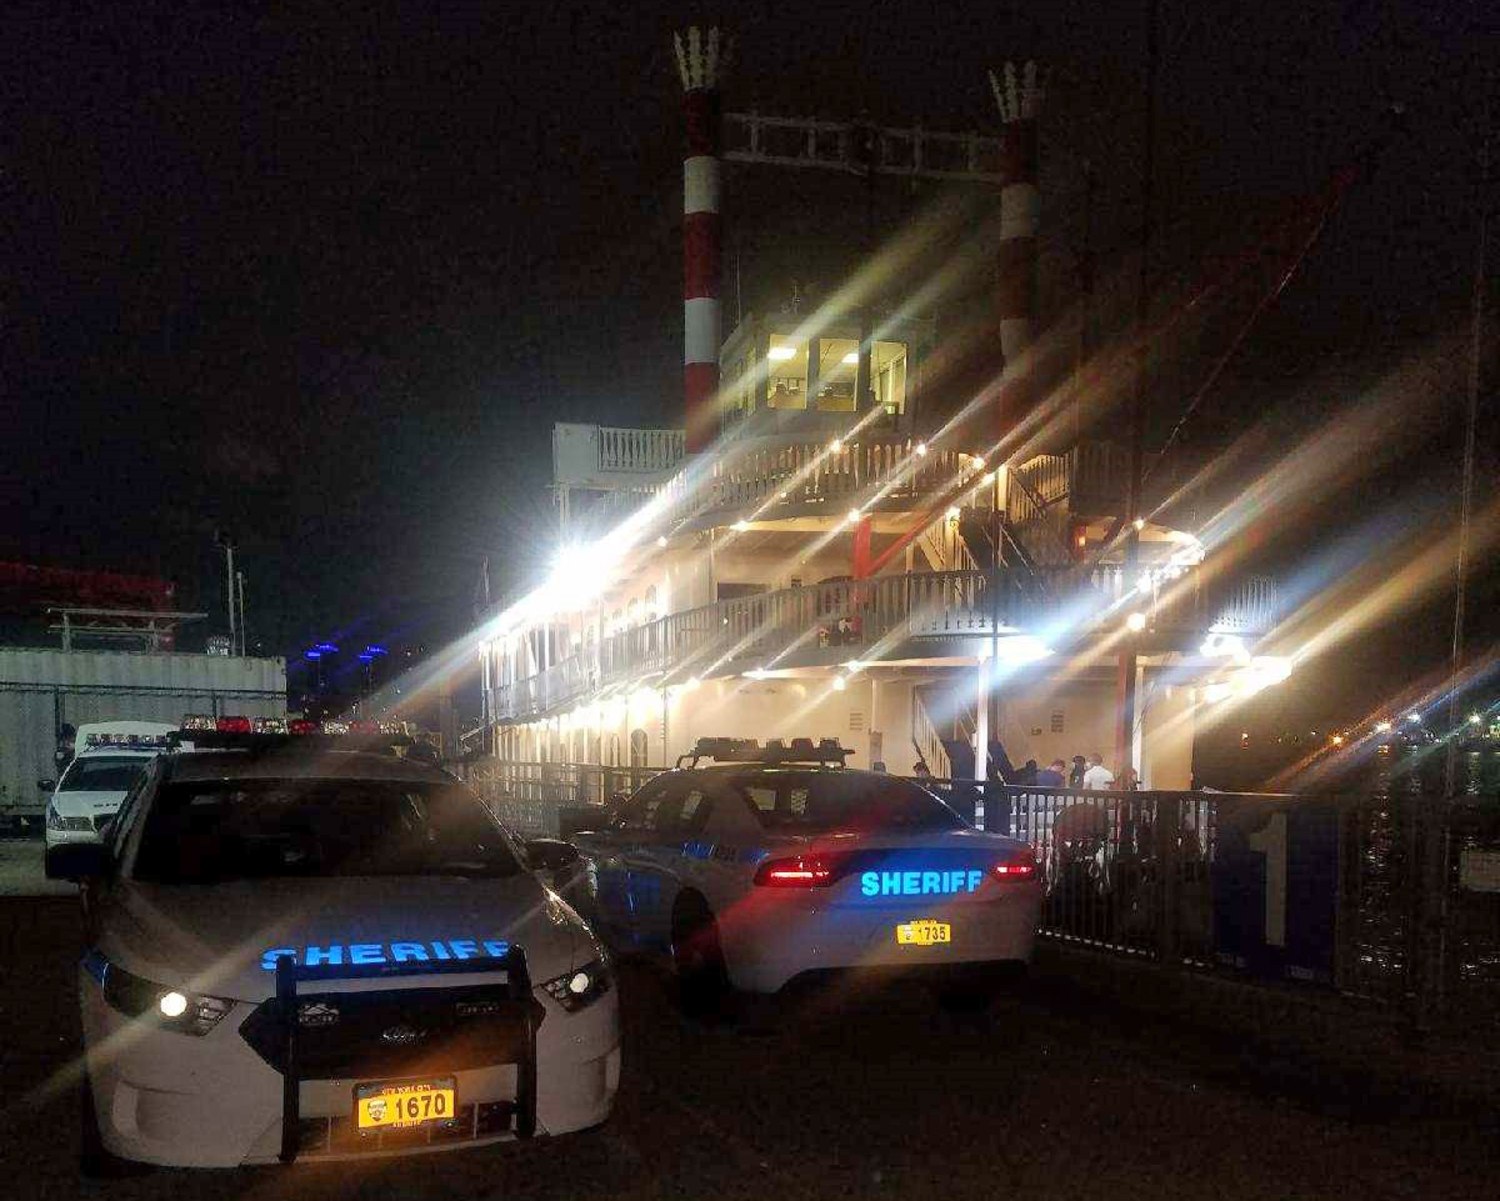 NYC party ship owners arrested, charged with breaking coronavirus orders on booze cruise photo pic